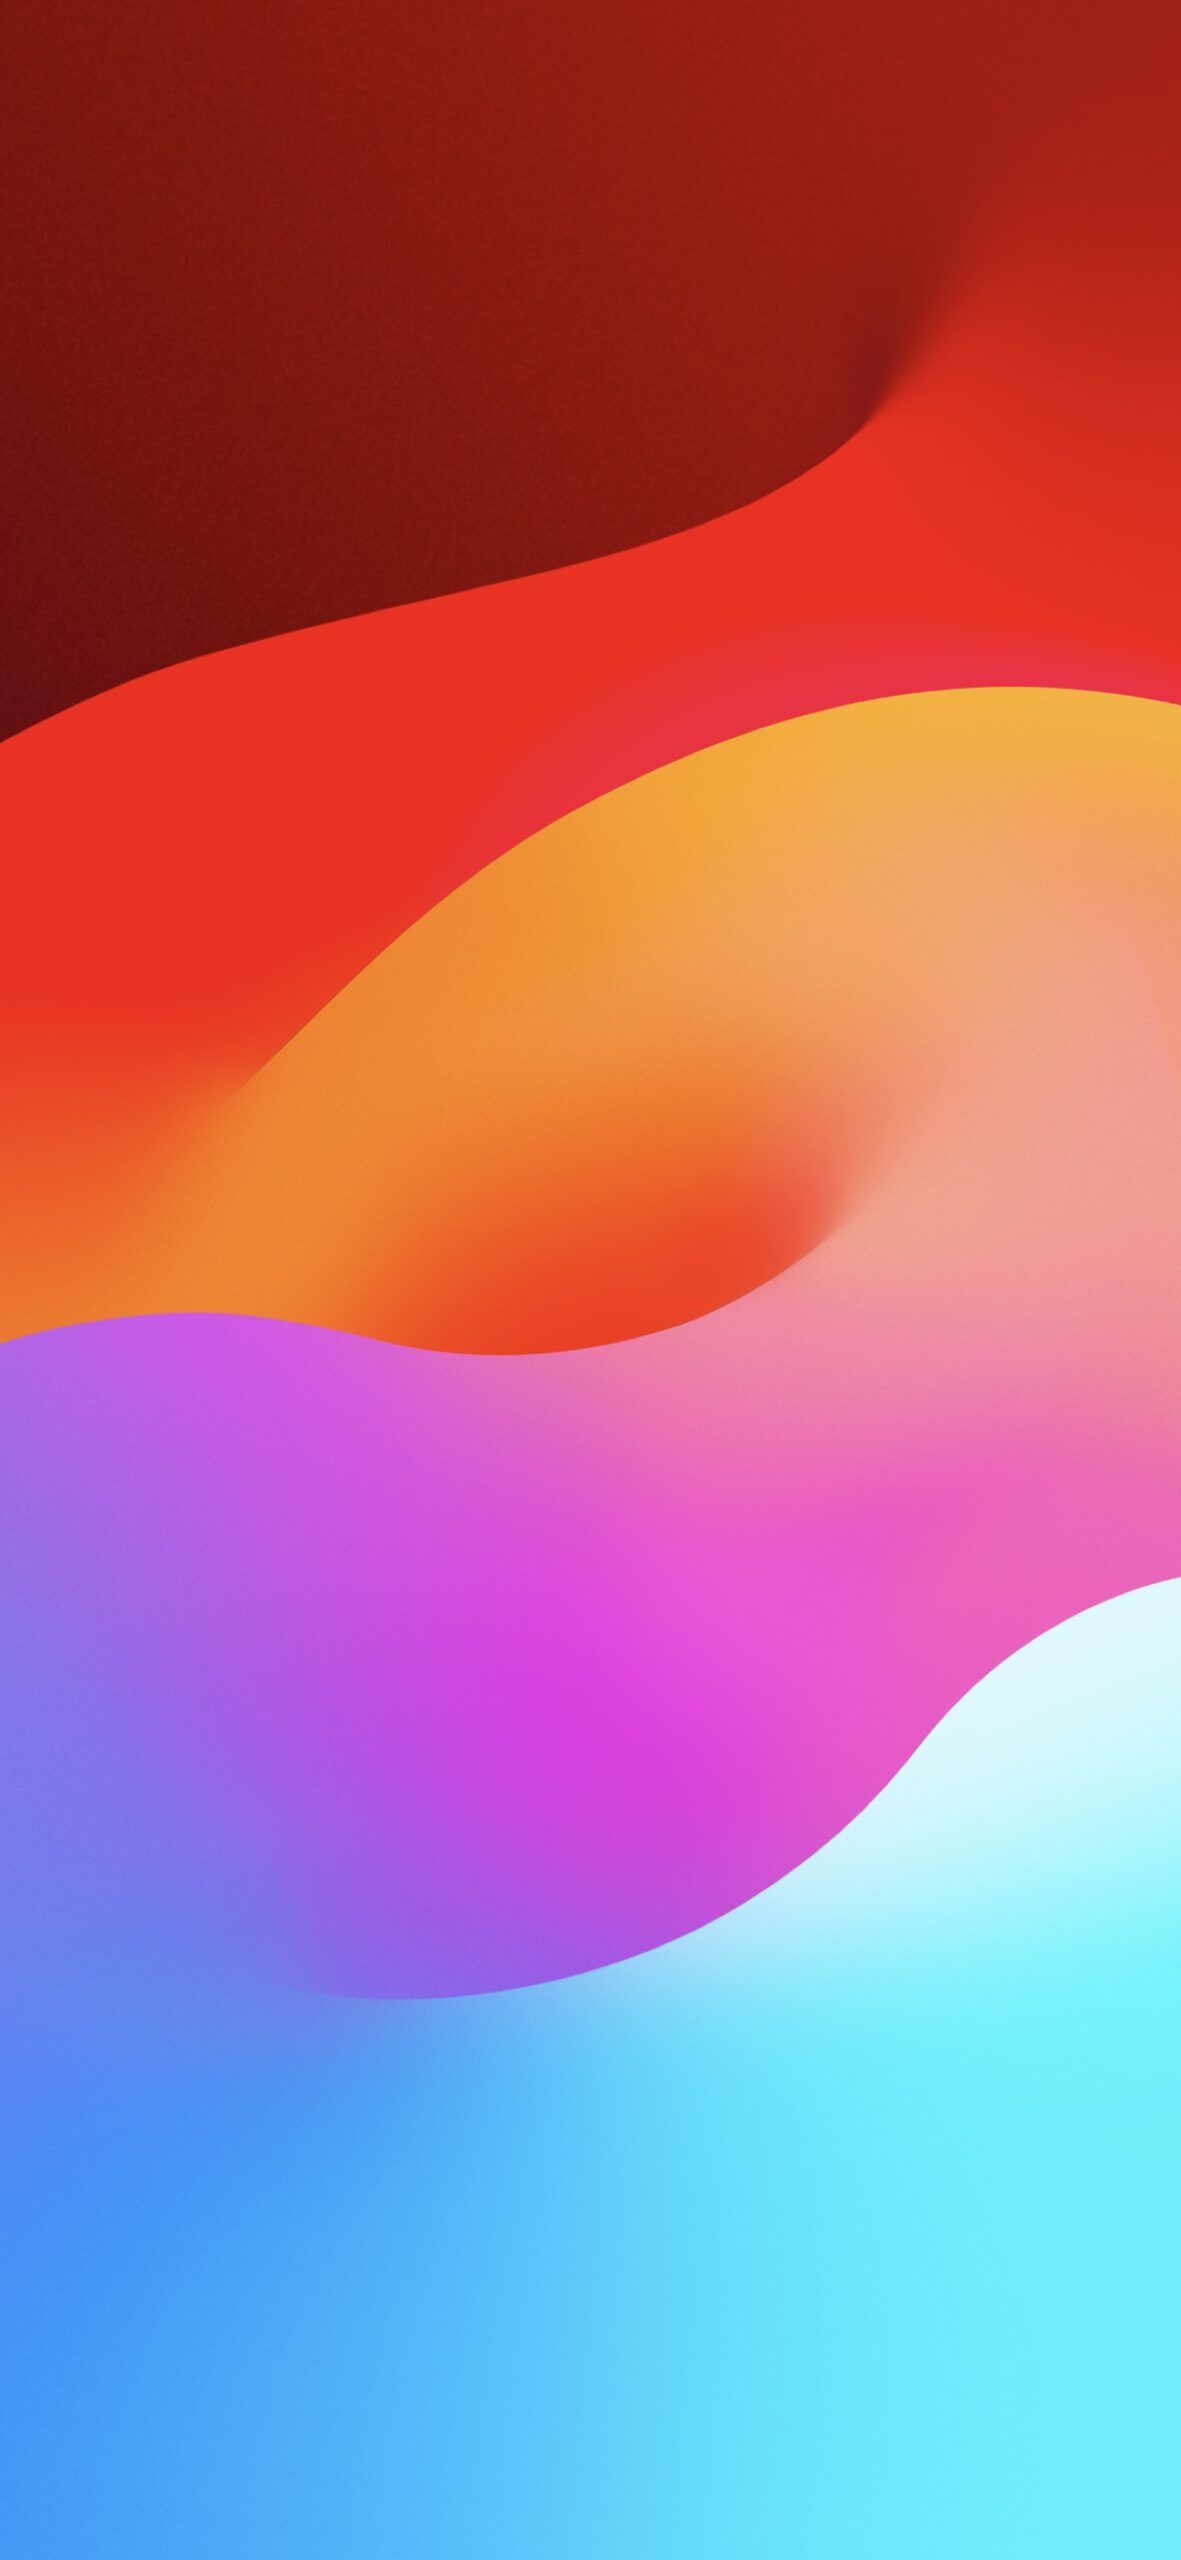 Get the iOS 17 Default Wallpapers Here